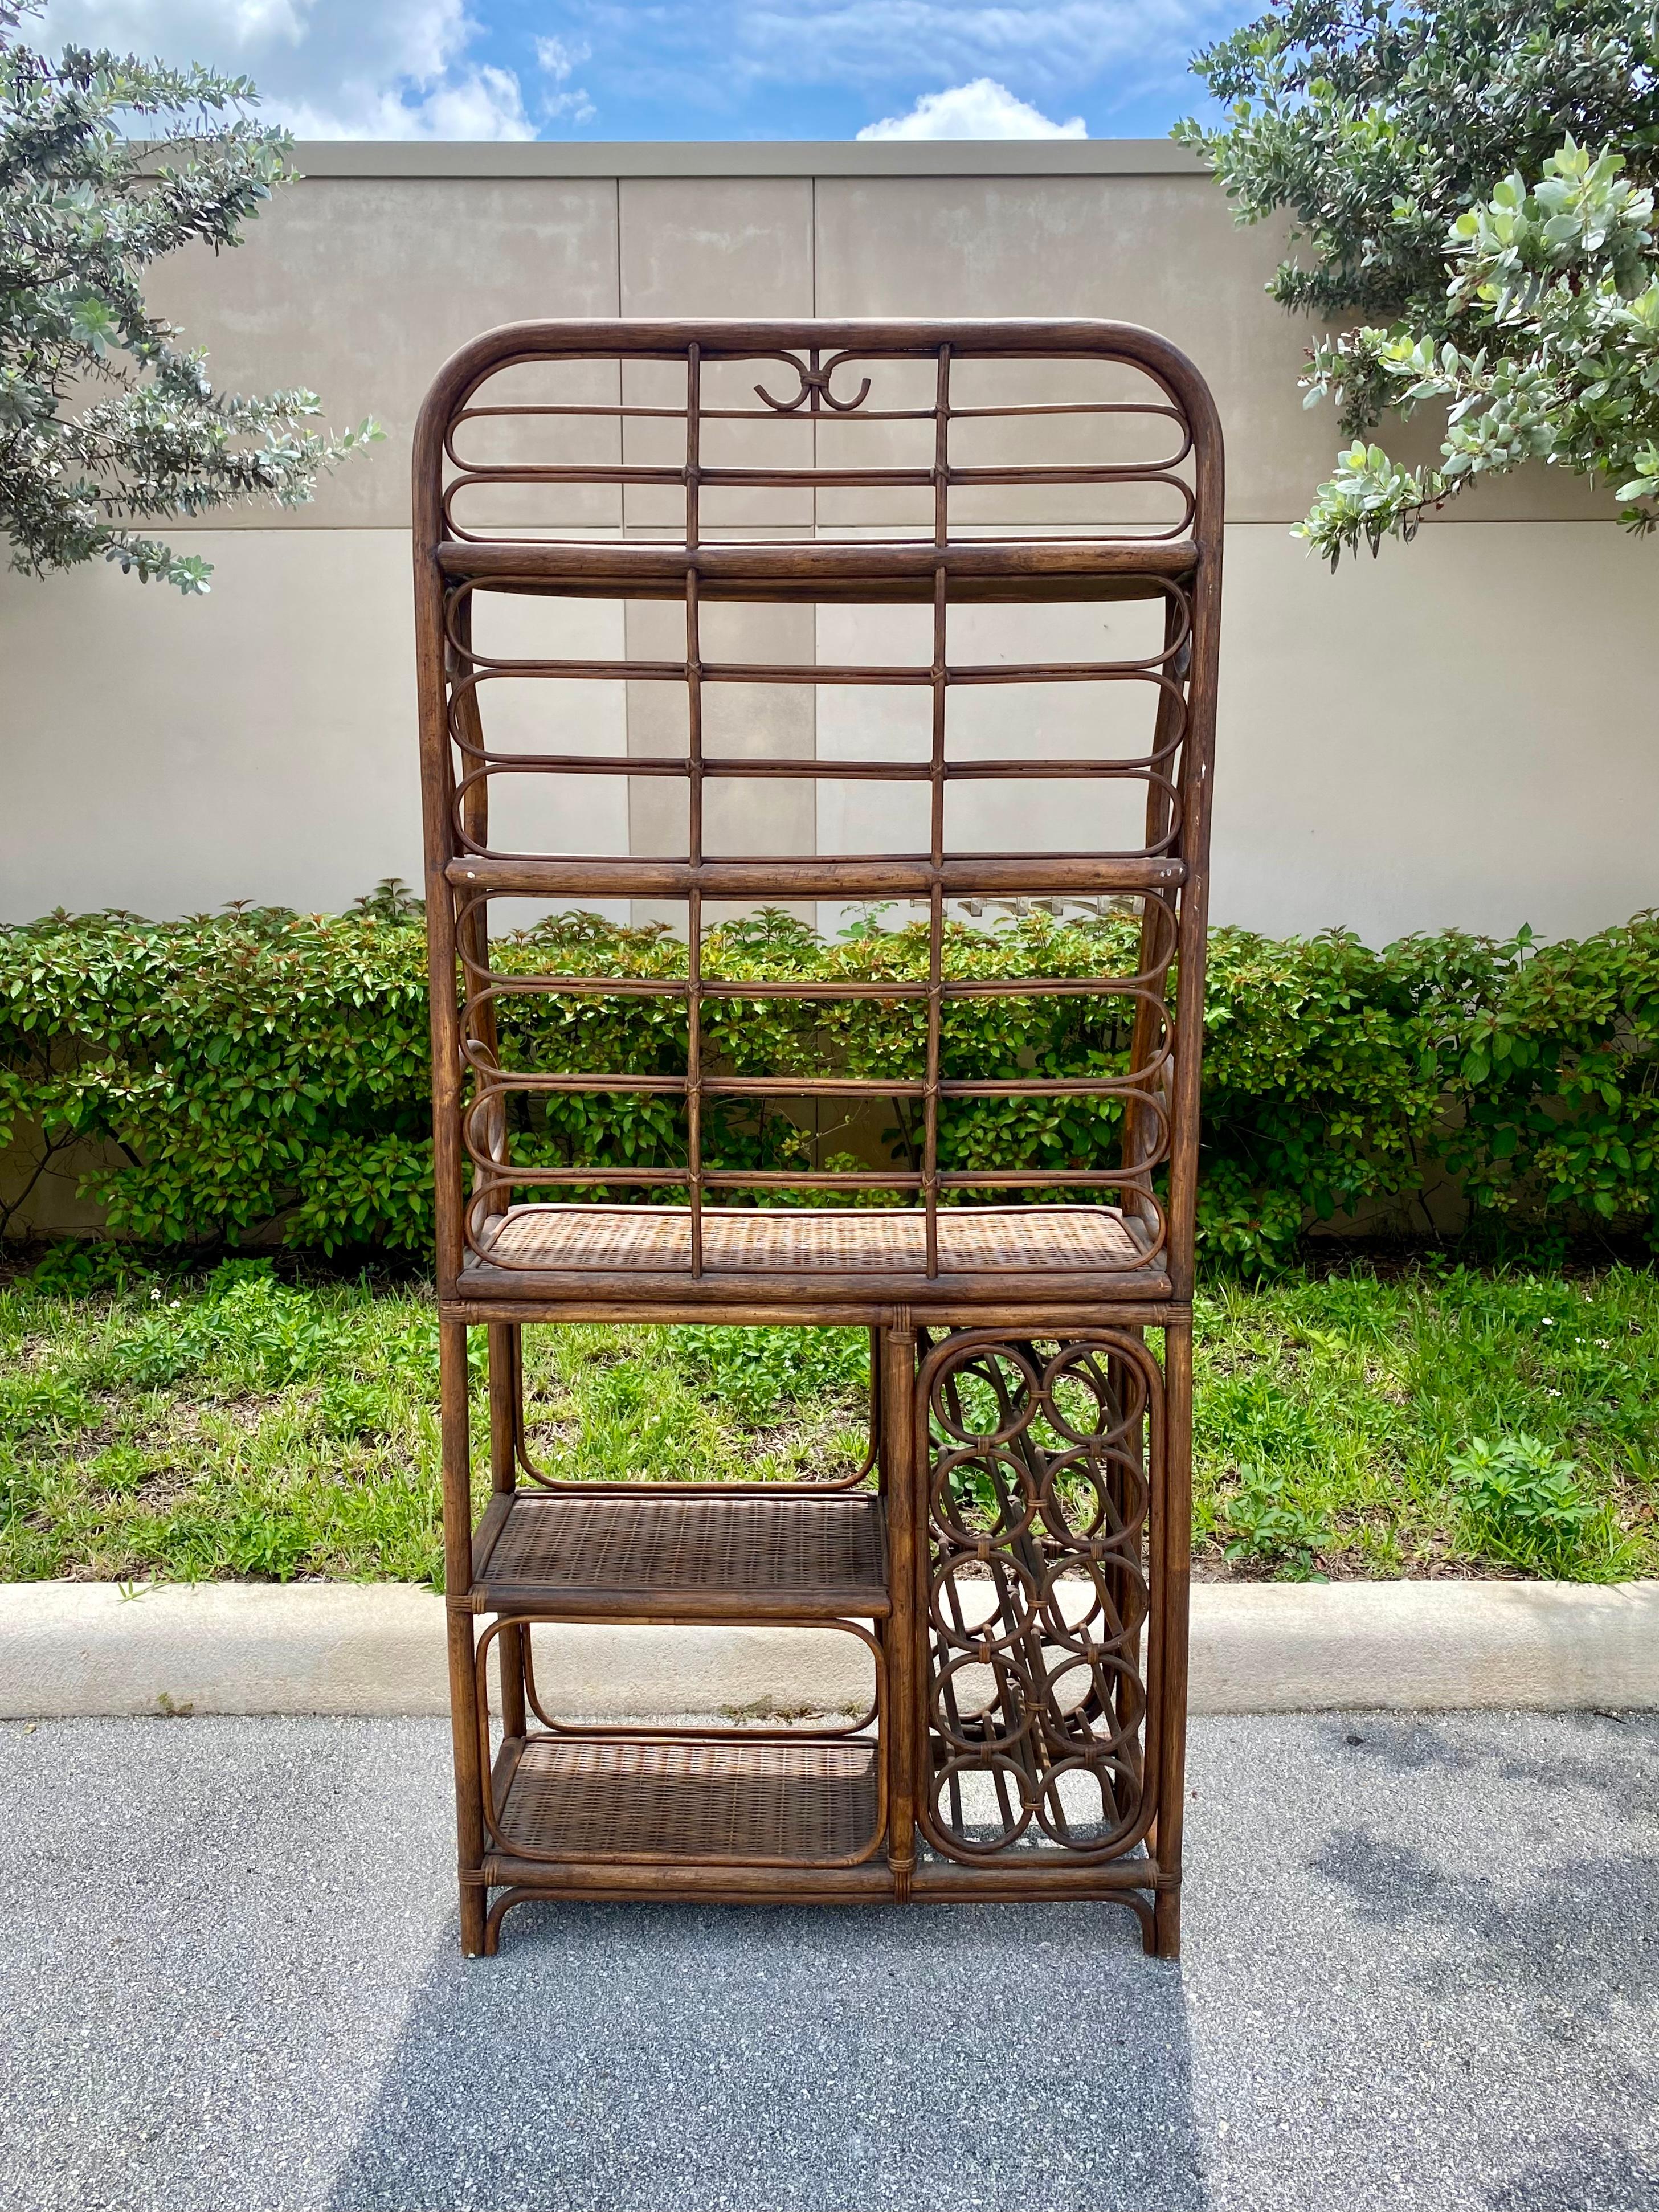 1970s Rattan and Lucite Wine Bar Bakers Rack Display Shelf In Good Condition For Sale In Fort Lauderdale, FL